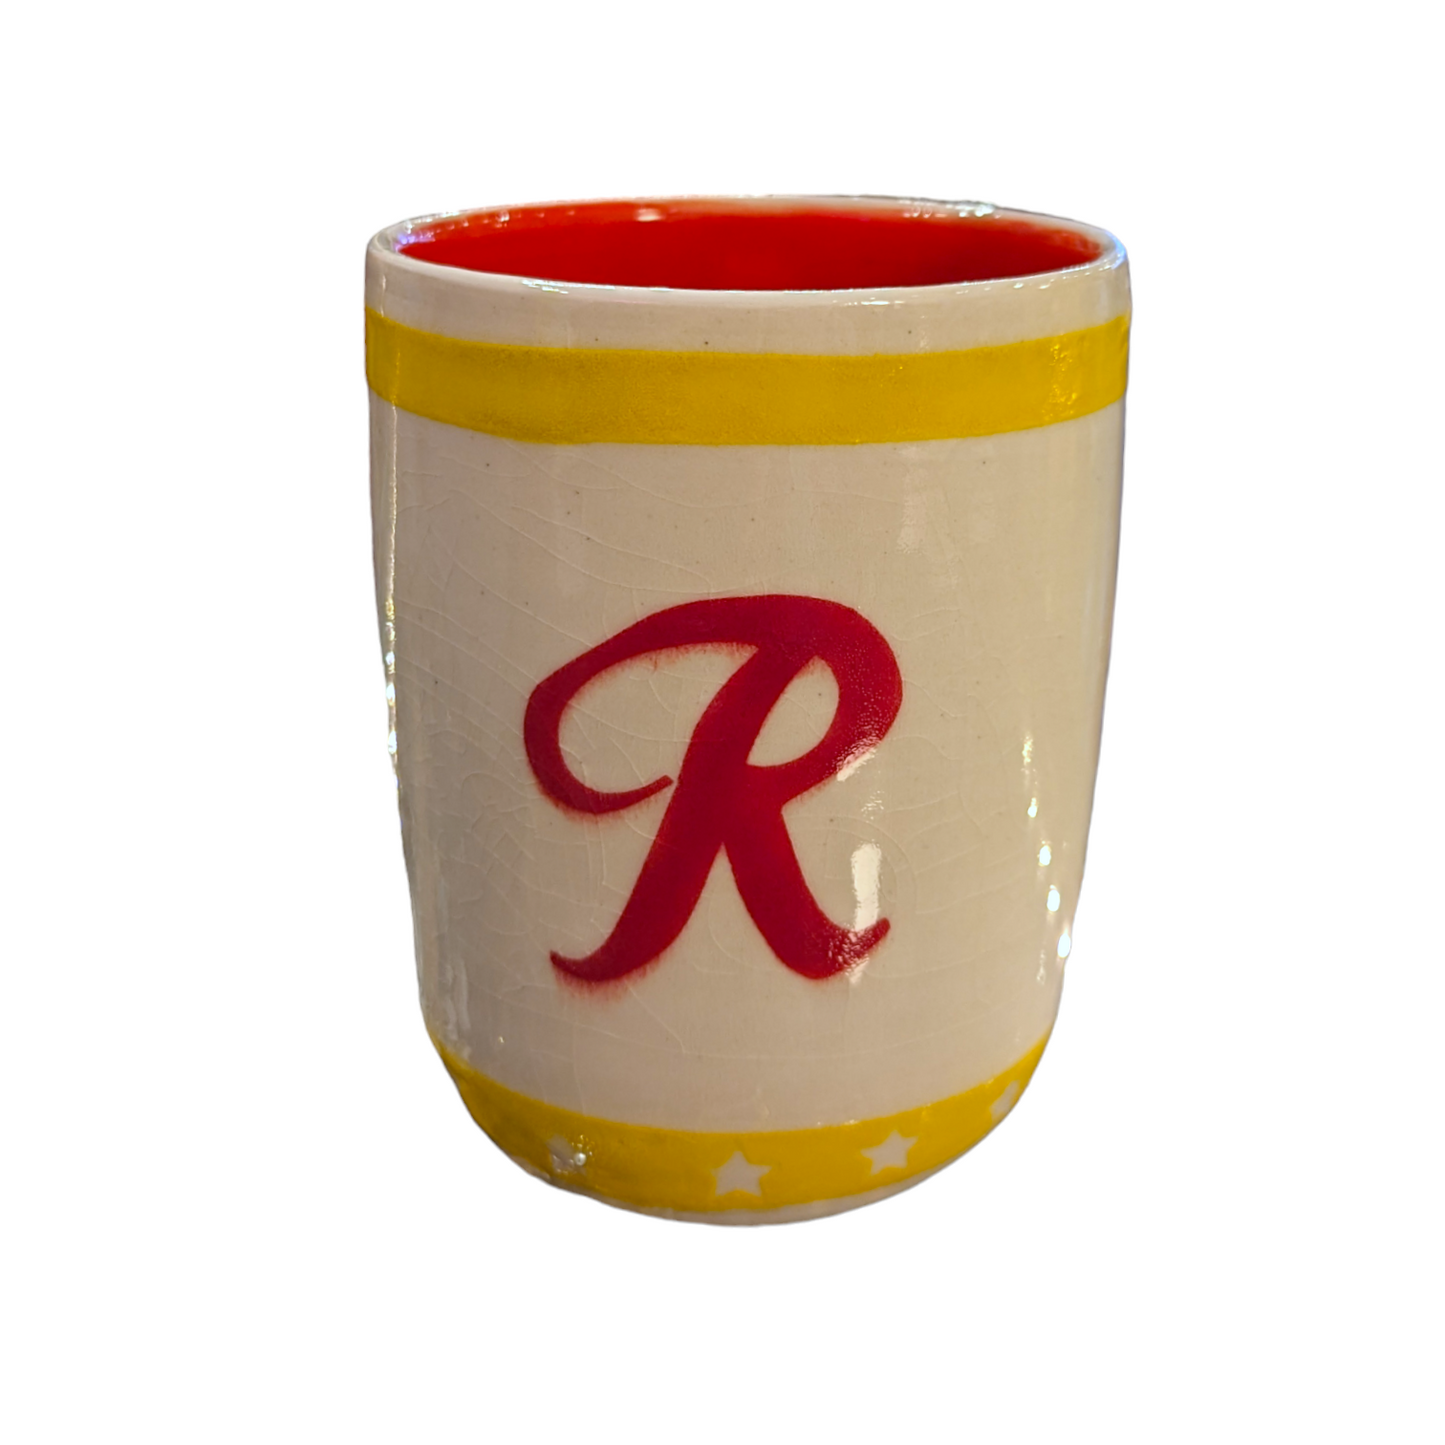 Ceramic Rainier Mug by the Introverted Potter